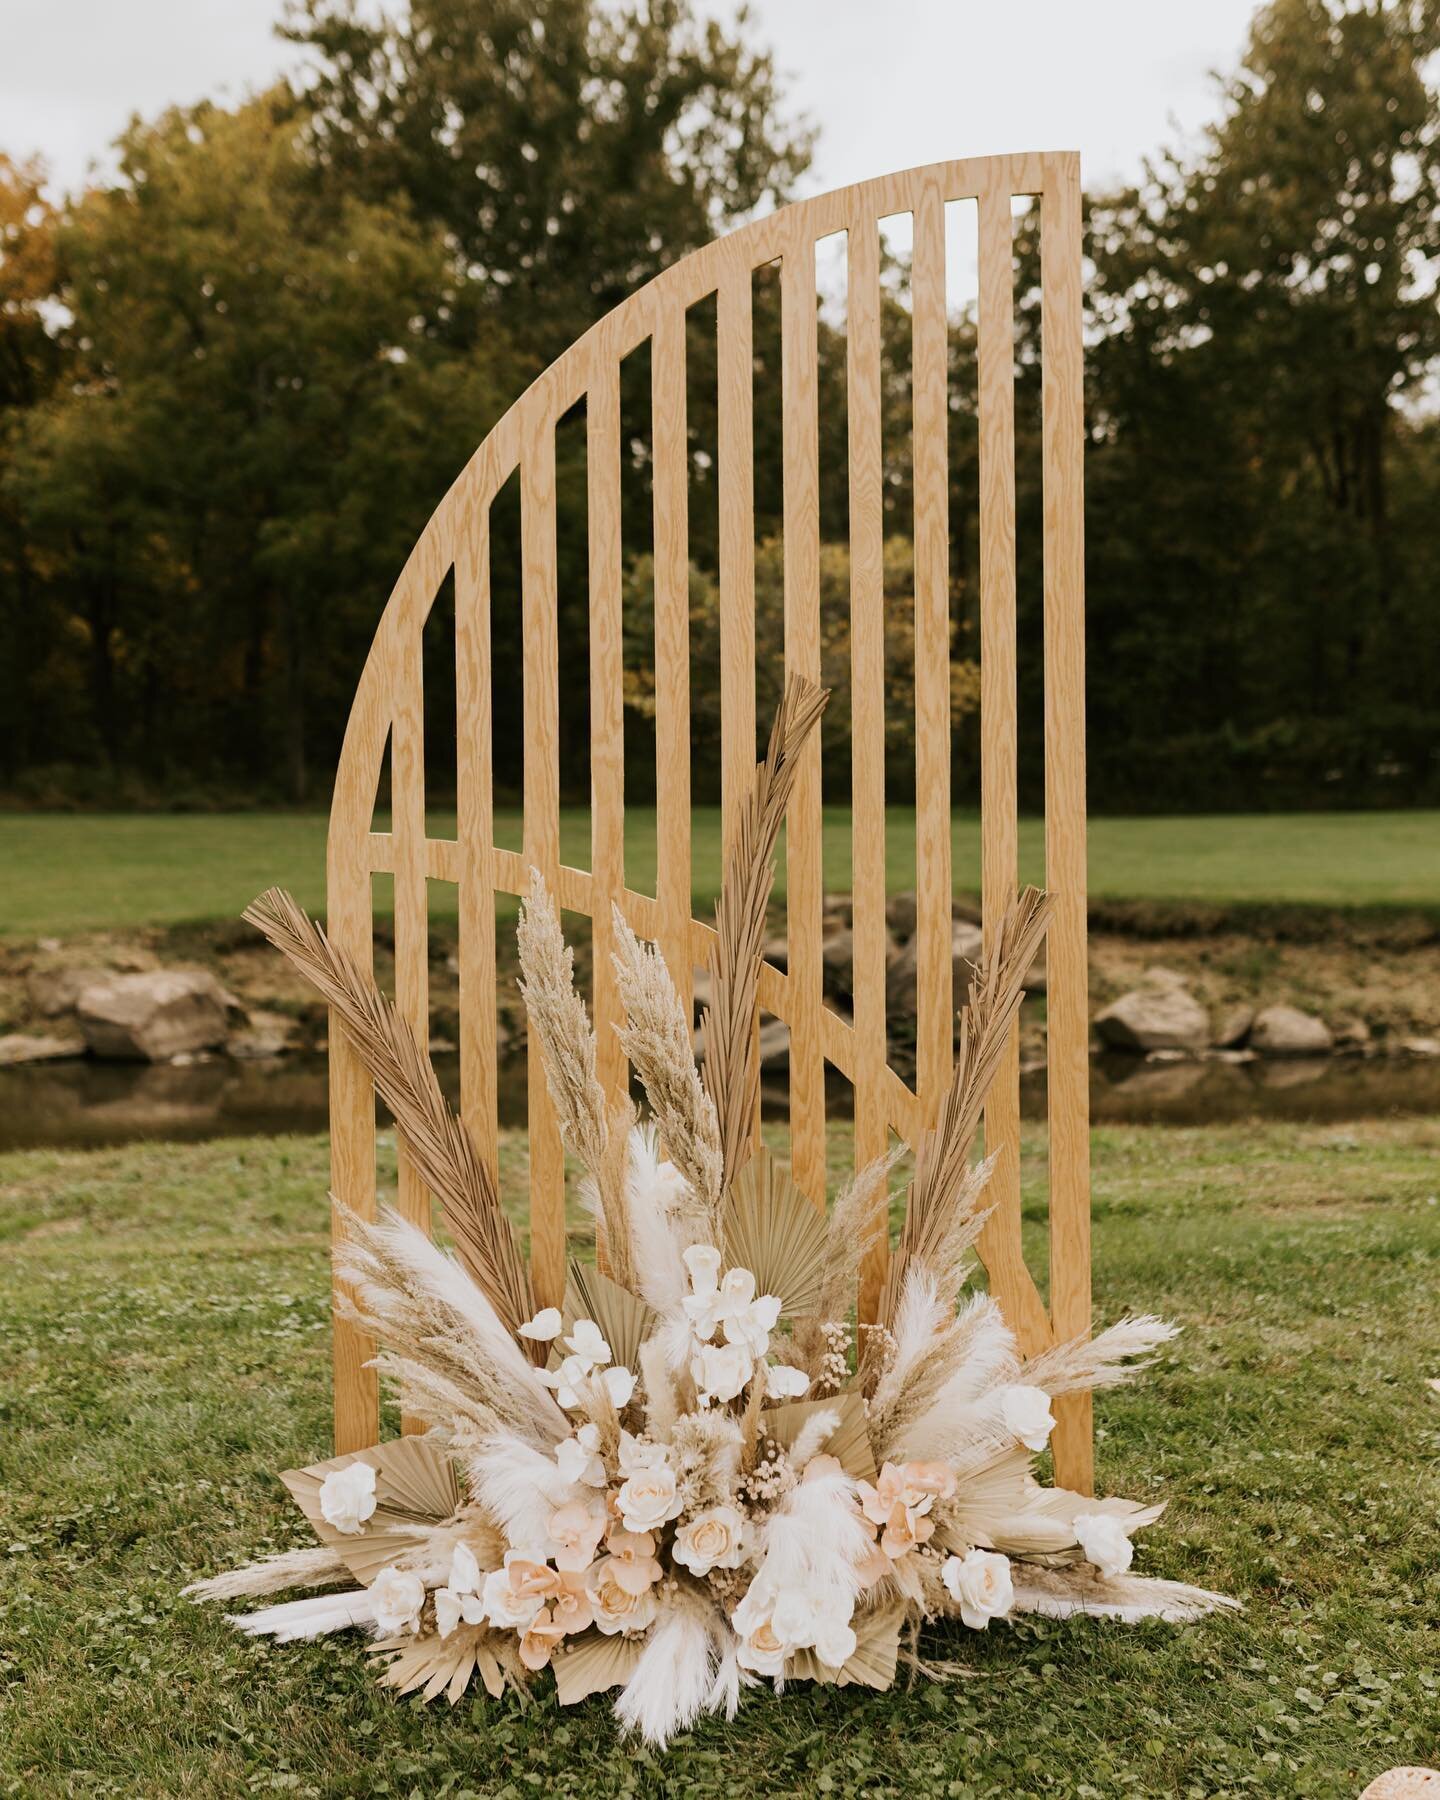 TRIPLE WHAMMY = When your ceremony arch is ALSO used for your family photos &amp; a sweetheart backdrop! 👏🏼📸🌼
 

Featured: Boho Backdrop, Arched Rattan Shelves, Rattan Tabletop, &amp; Boho Rug 🤍

Photographer: @moodymountainsphotography